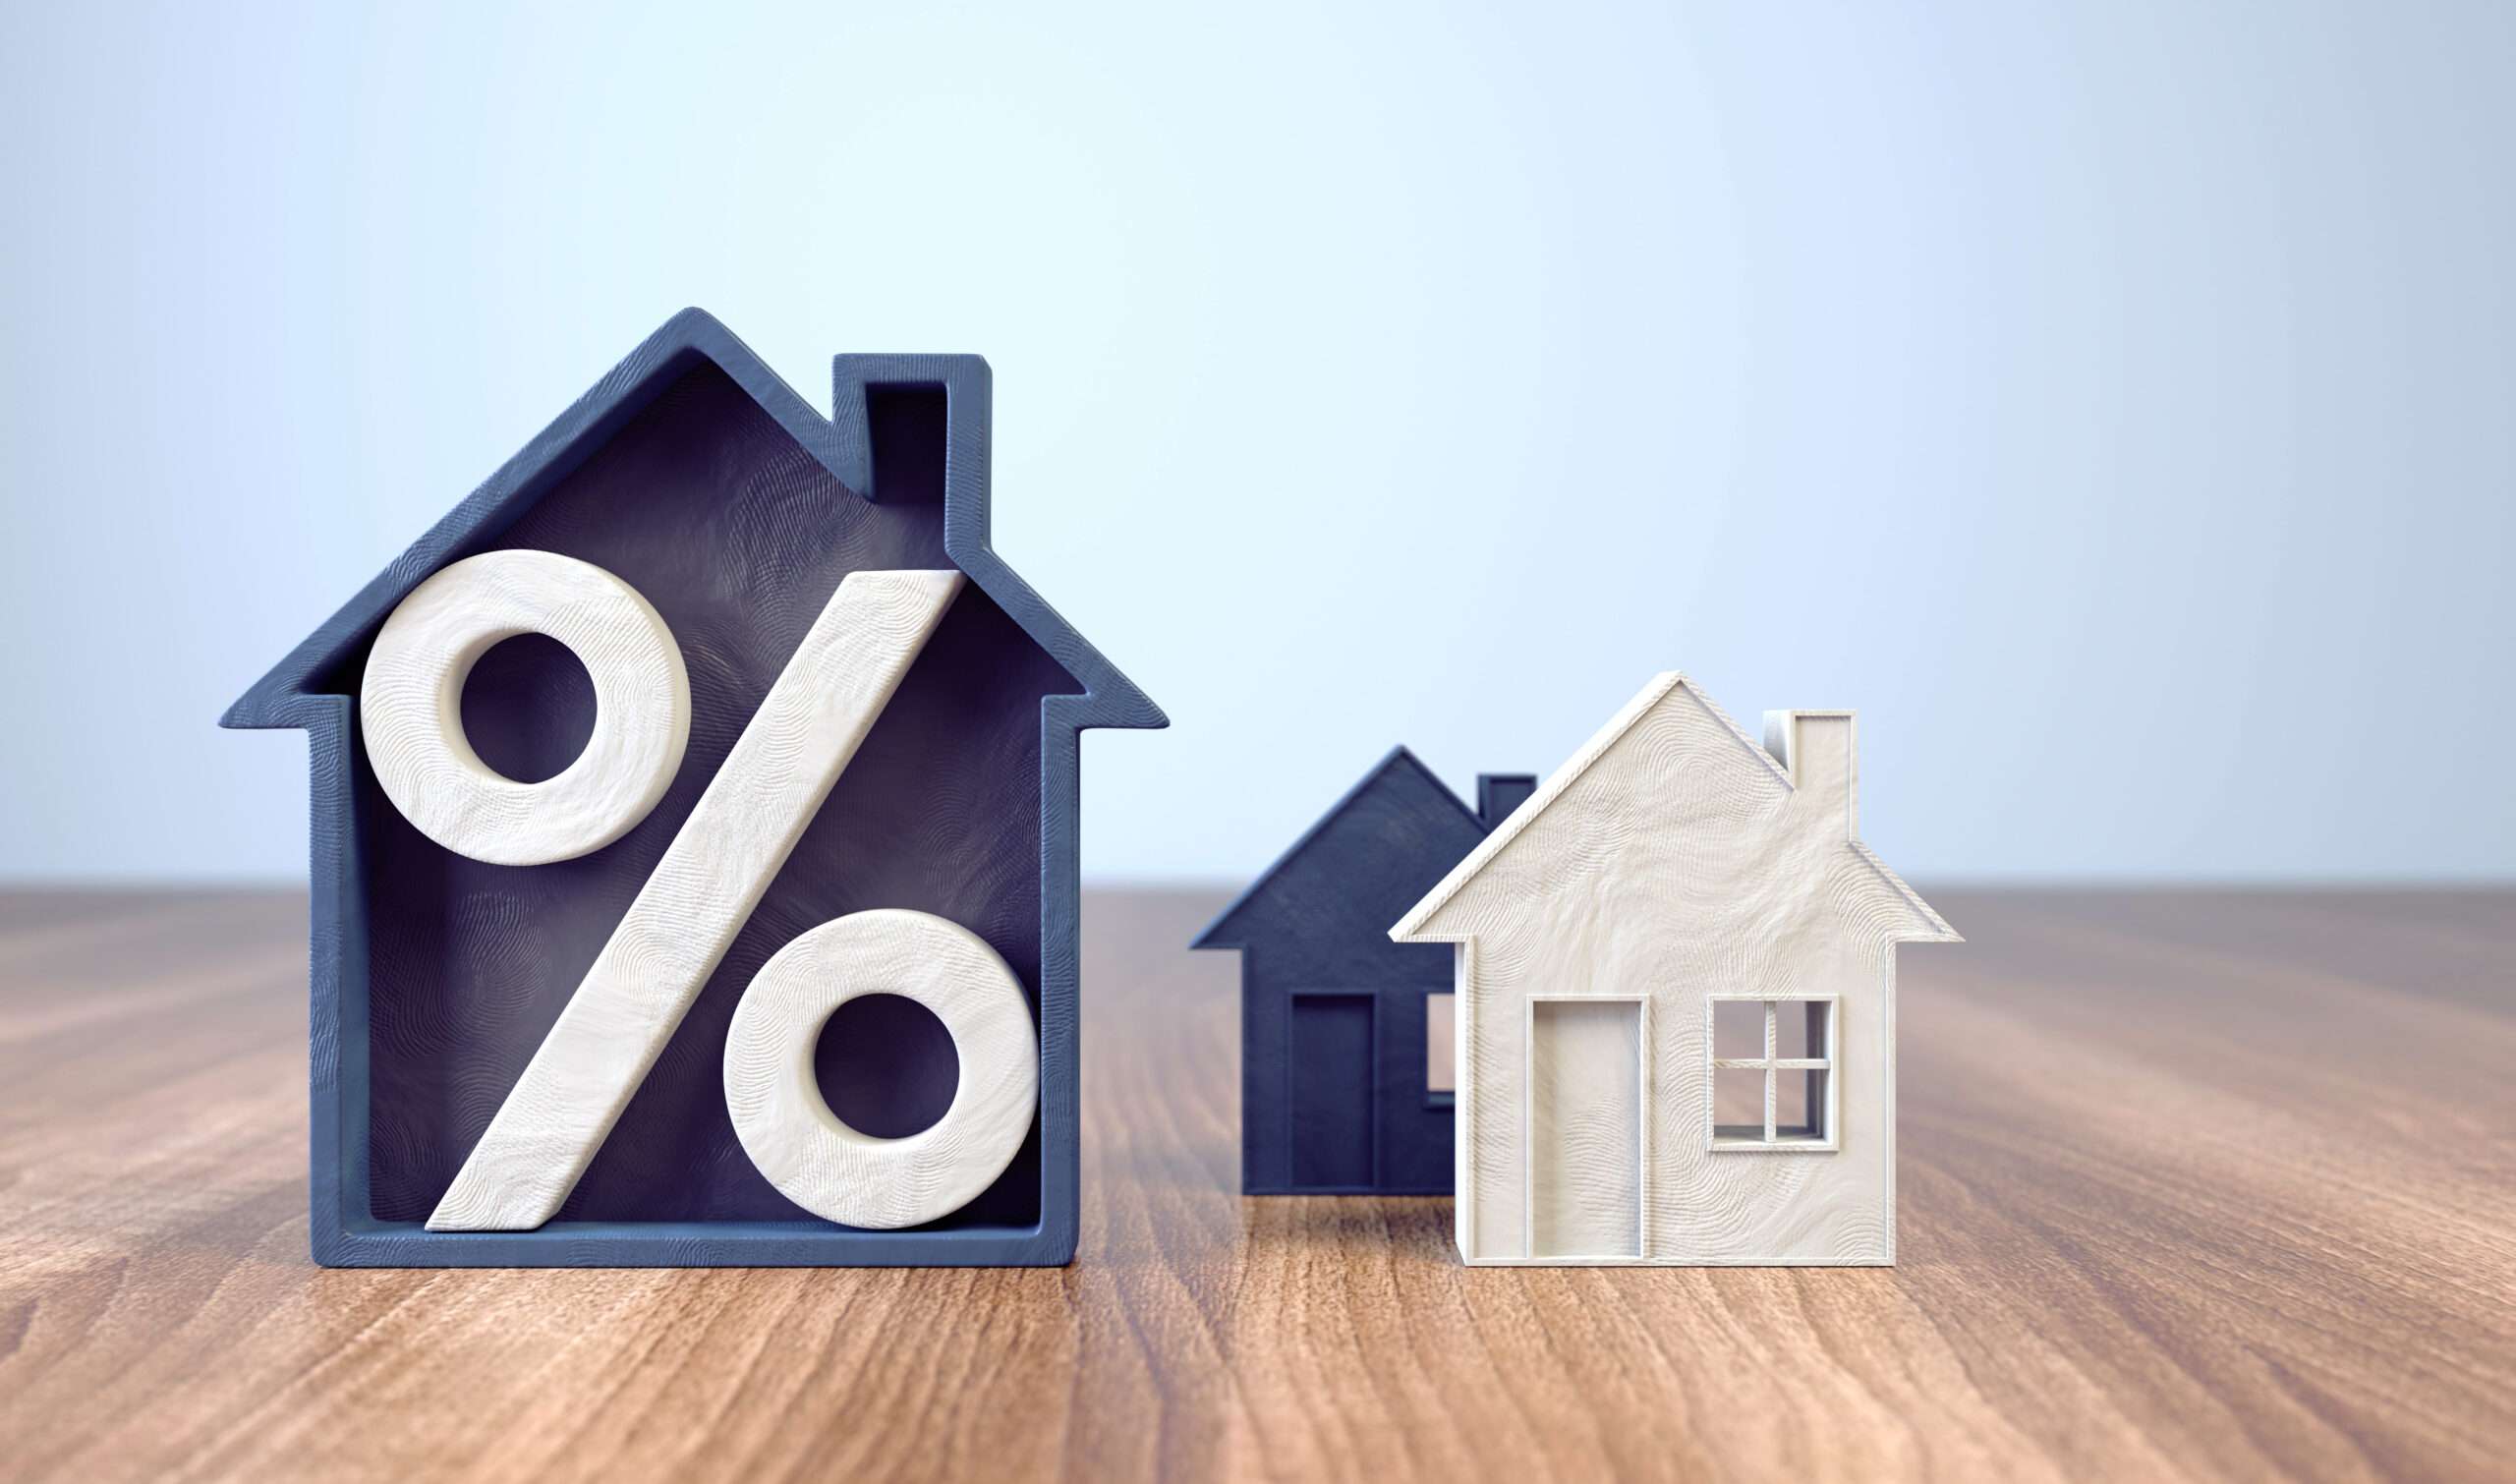 3% Mortgage Rate